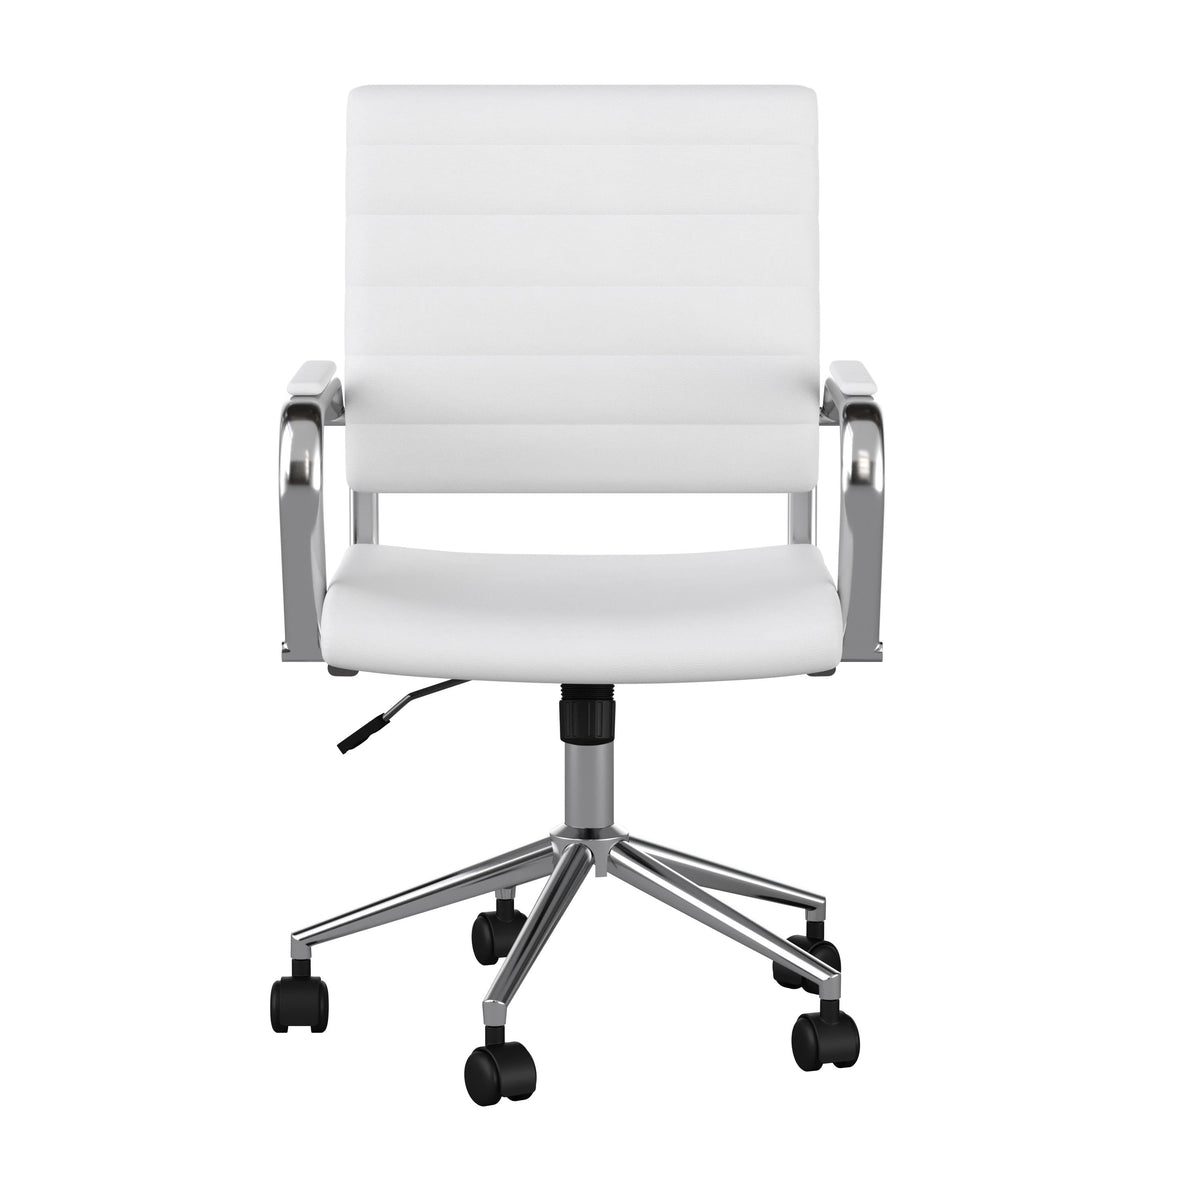 White Faux Leather/Polished Nickel |#| Ribbed Faux Leather Swivel Home Office Chair with Armrests-White/Polished Nickel